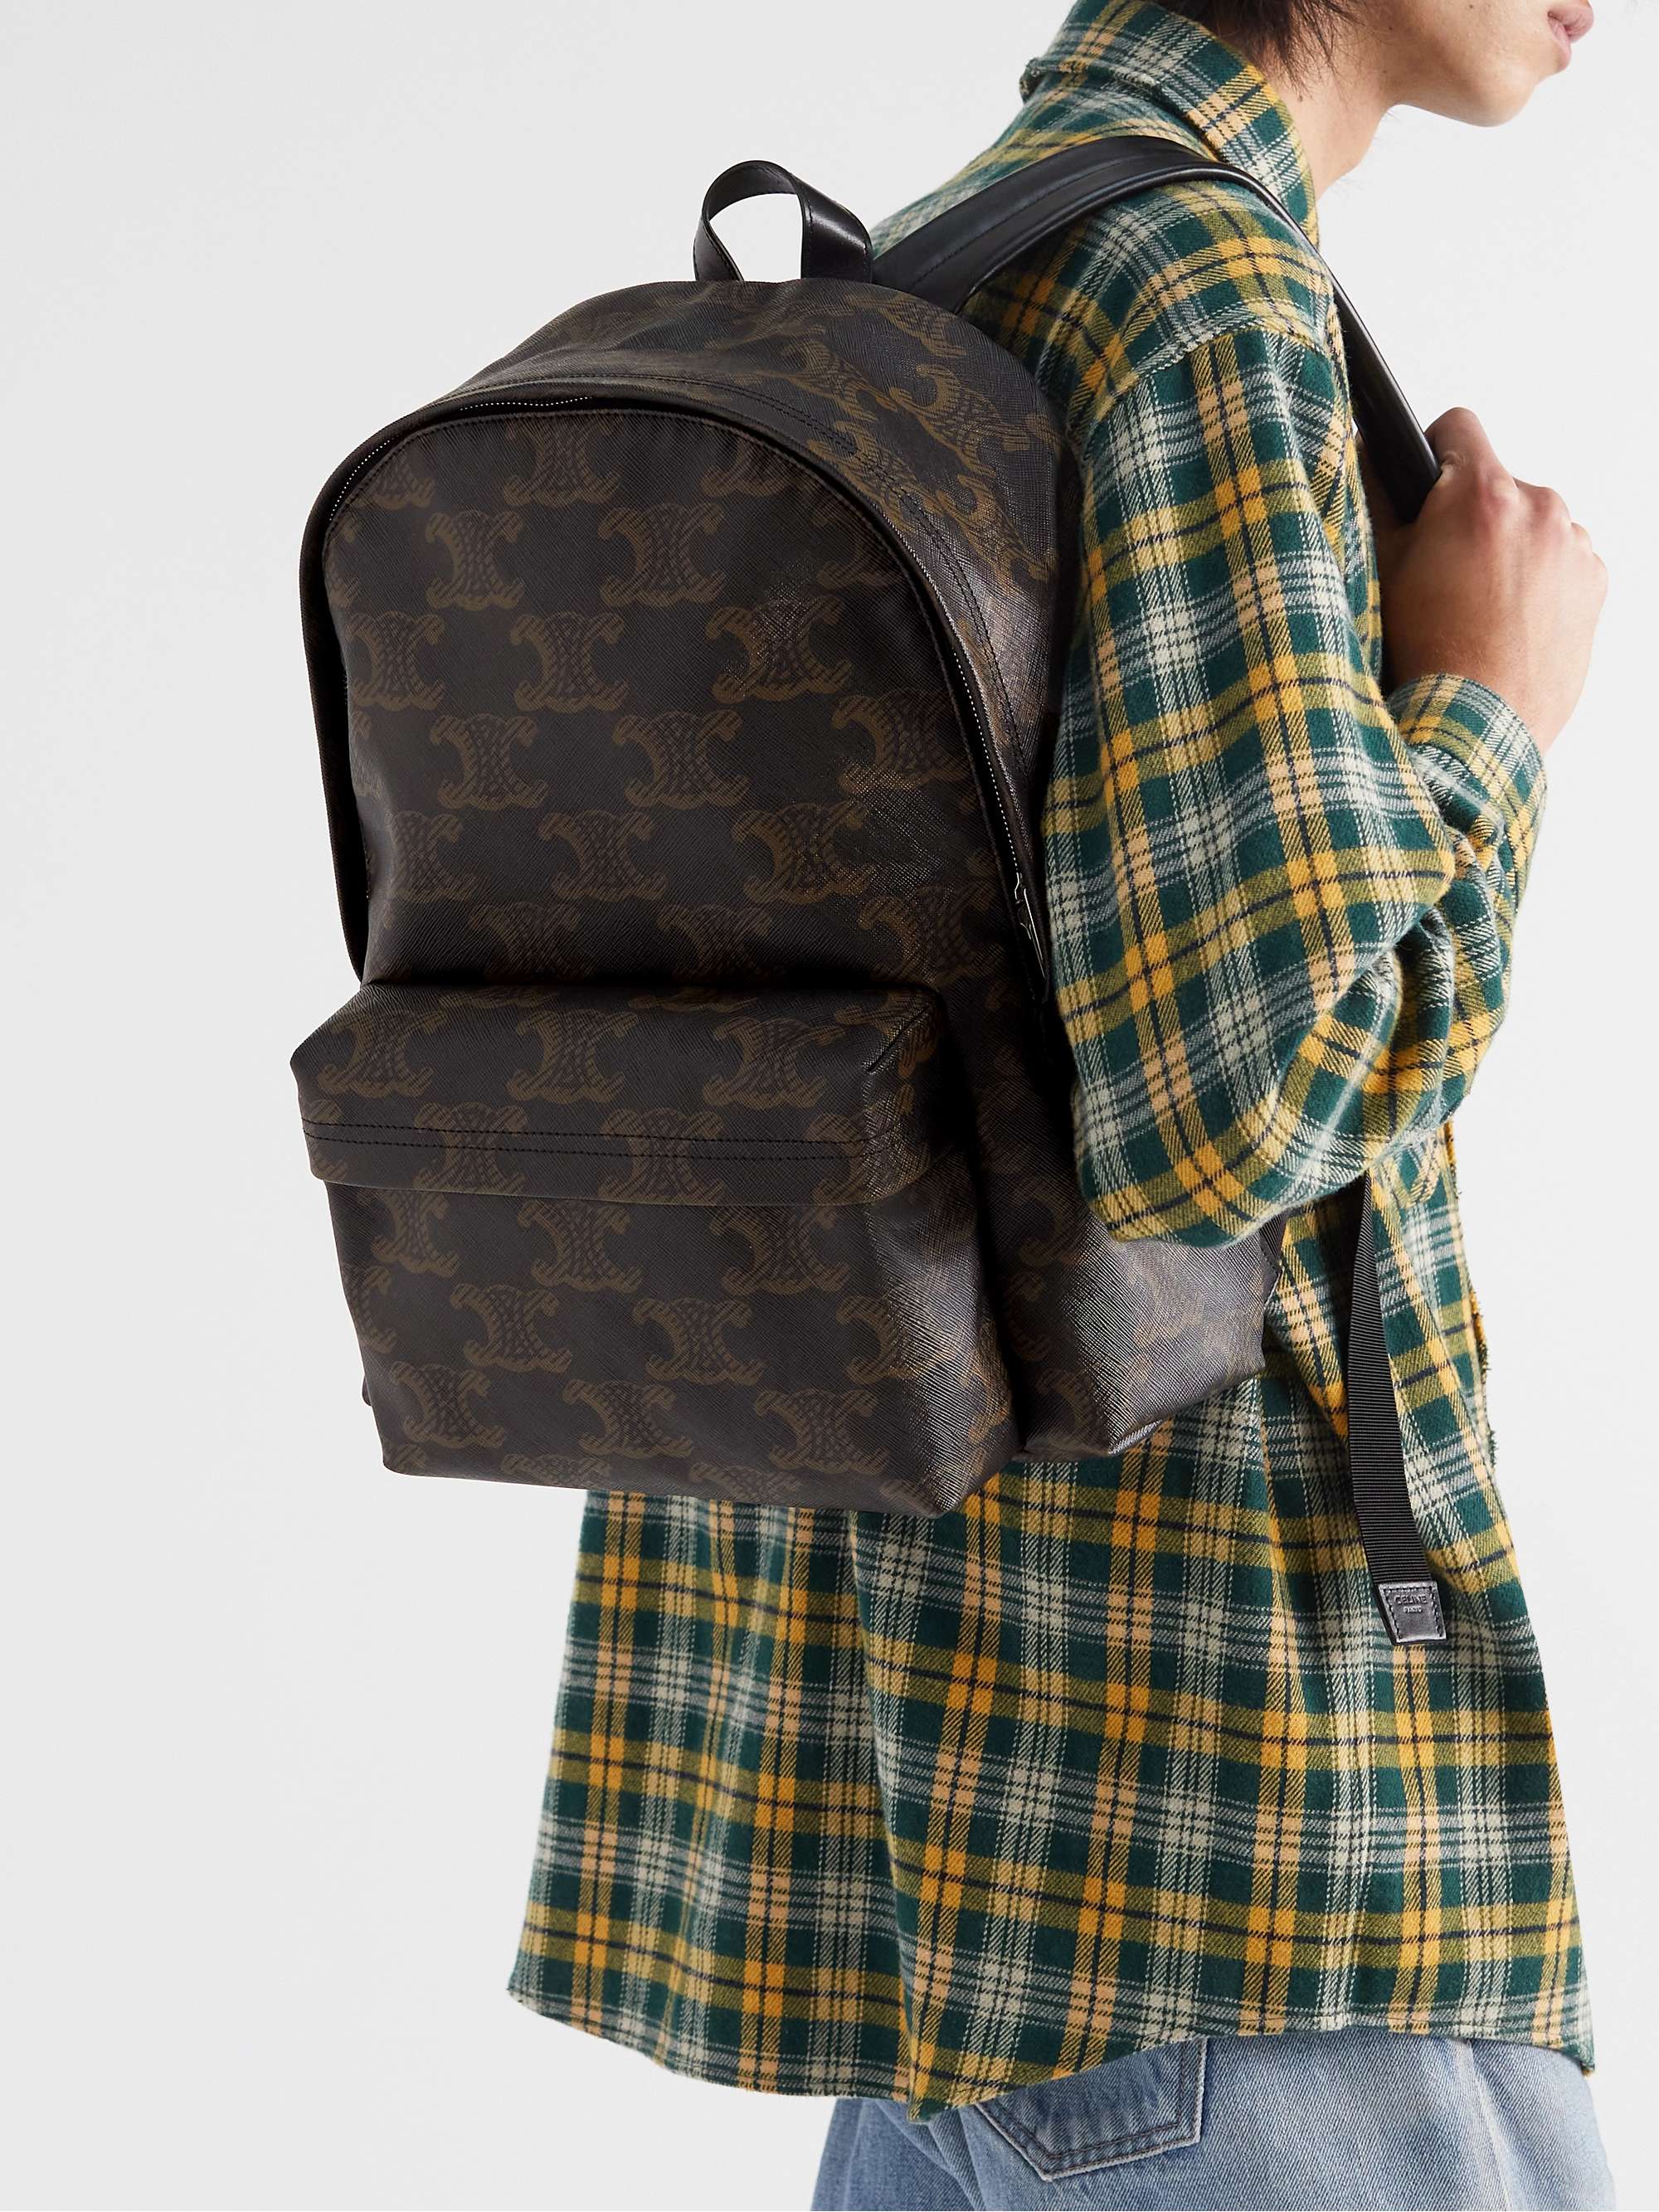 CELINE HOMME Triomphe Leather-Trimmed Logo-Print Coated-Canvas Backpack